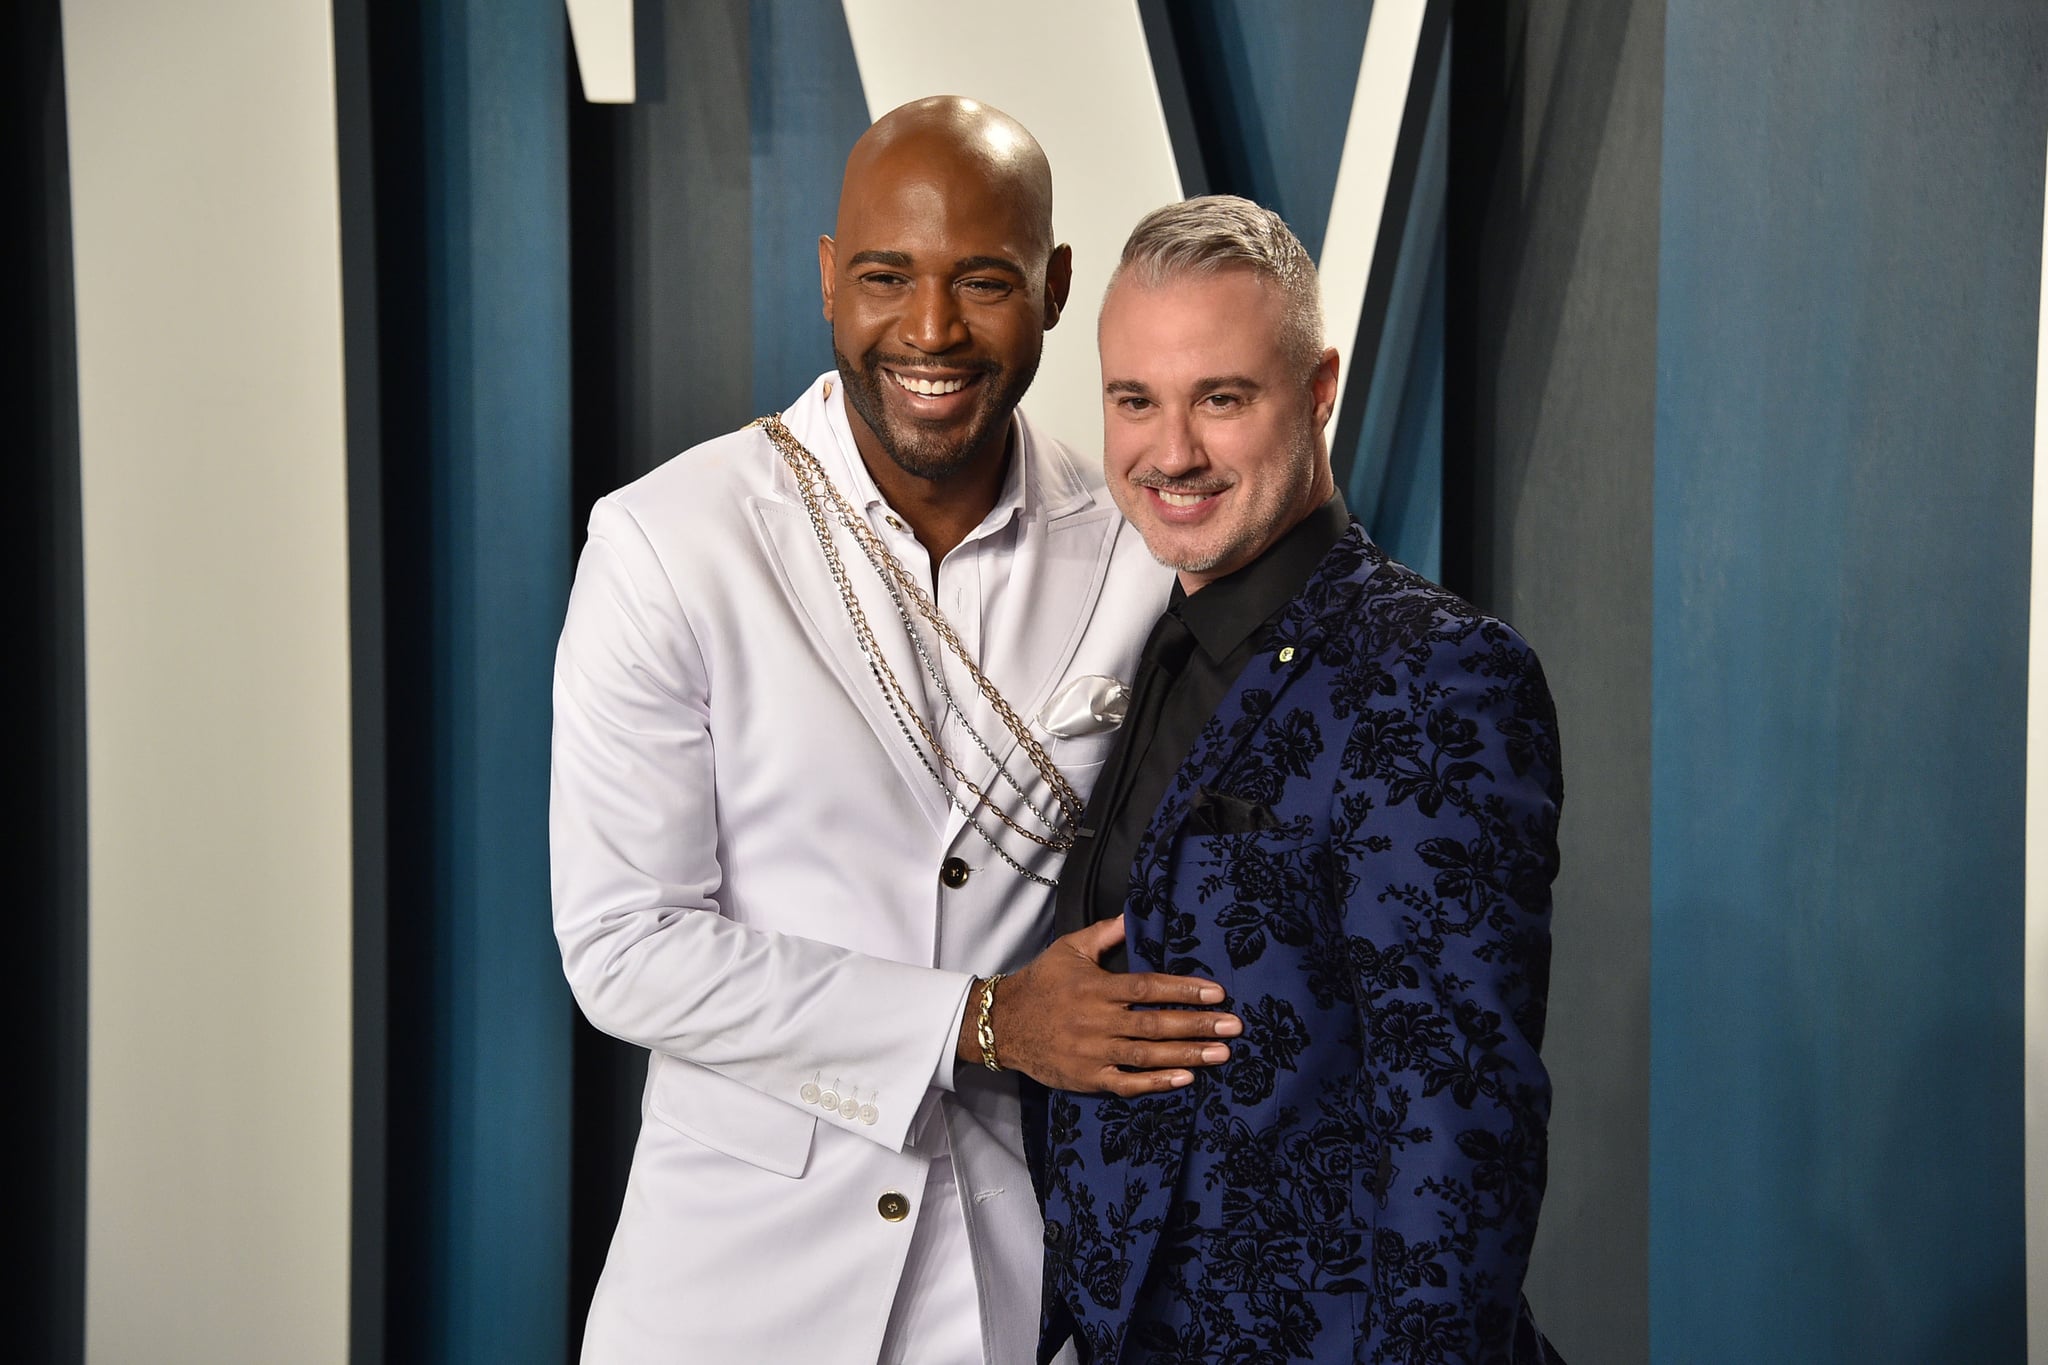 BEVERLY HILLS, CALIFORNIA - FEBRUARY 09: Karamo Brown and Ian Jordan attend the 2020 Vanity Fair Oscar Party at Wallis Annenberg Centre for the Performing Arts on February 09, 2020 in Beverly Hills, California. (Photo by David Crotty/Patrick McMullan via Getty Images)